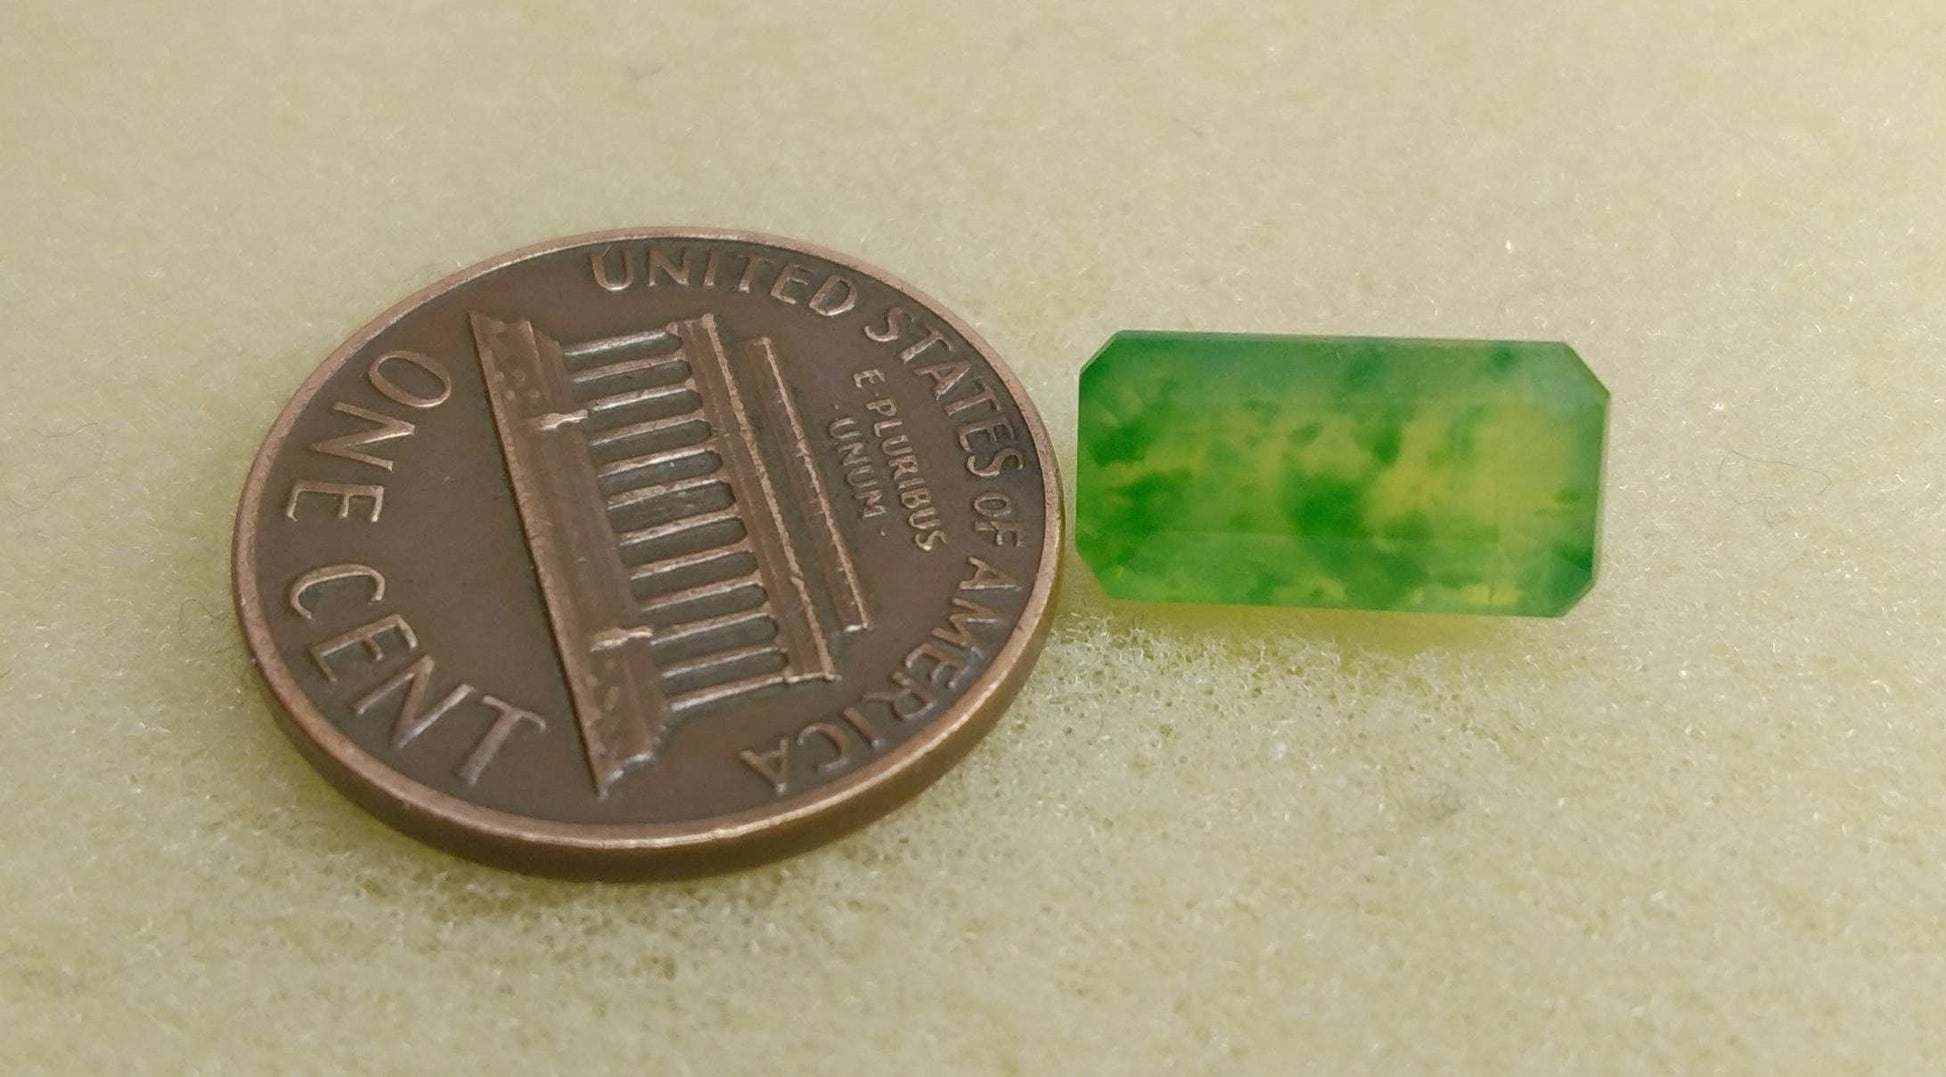 ARSAA GEMS AND MINERALSNatural top quality beautiful 5 carats radiant shape green faceted hydrograssular garnet gem - Premium  from ARSAA GEMS AND MINERALS - Just $15.00! Shop now at ARSAA GEMS AND MINERALS